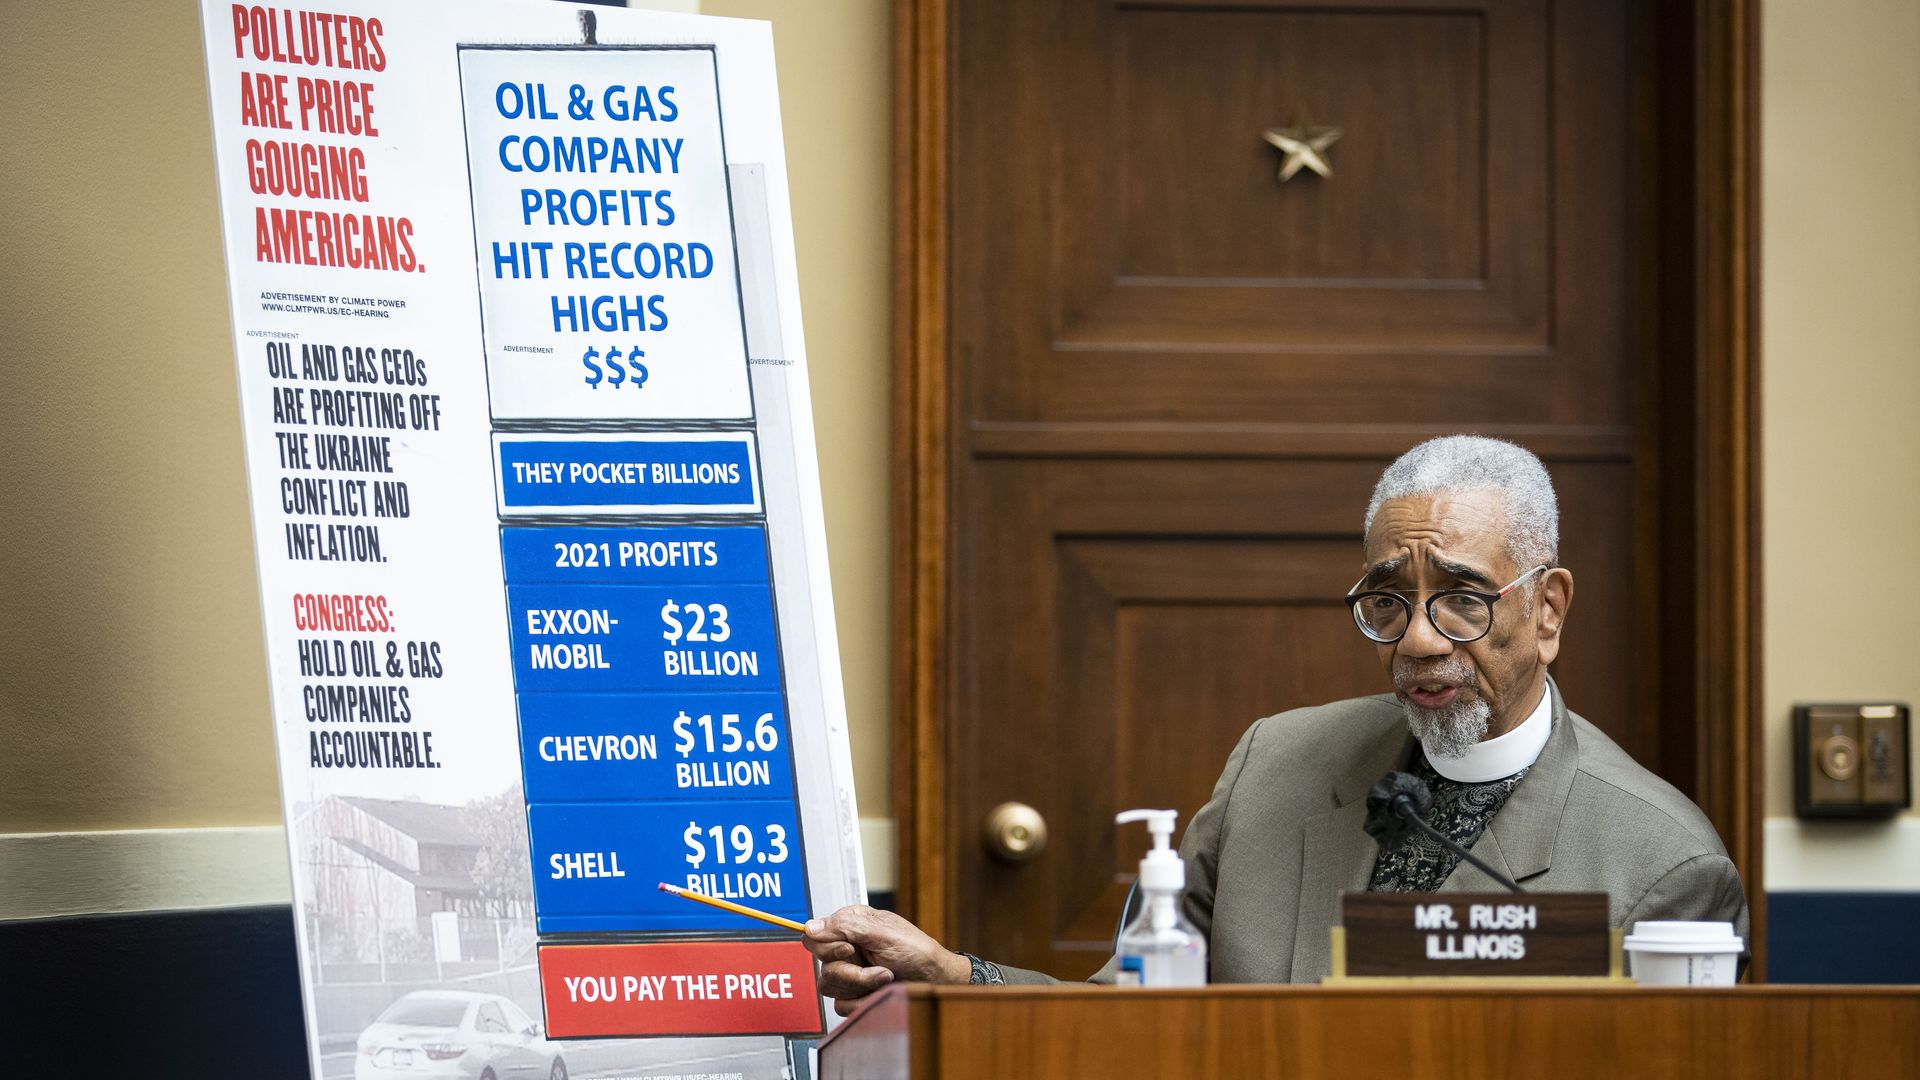 Rep. Bobby Rush is seen next to a chart showing oil company profits amid his gasoline prices.